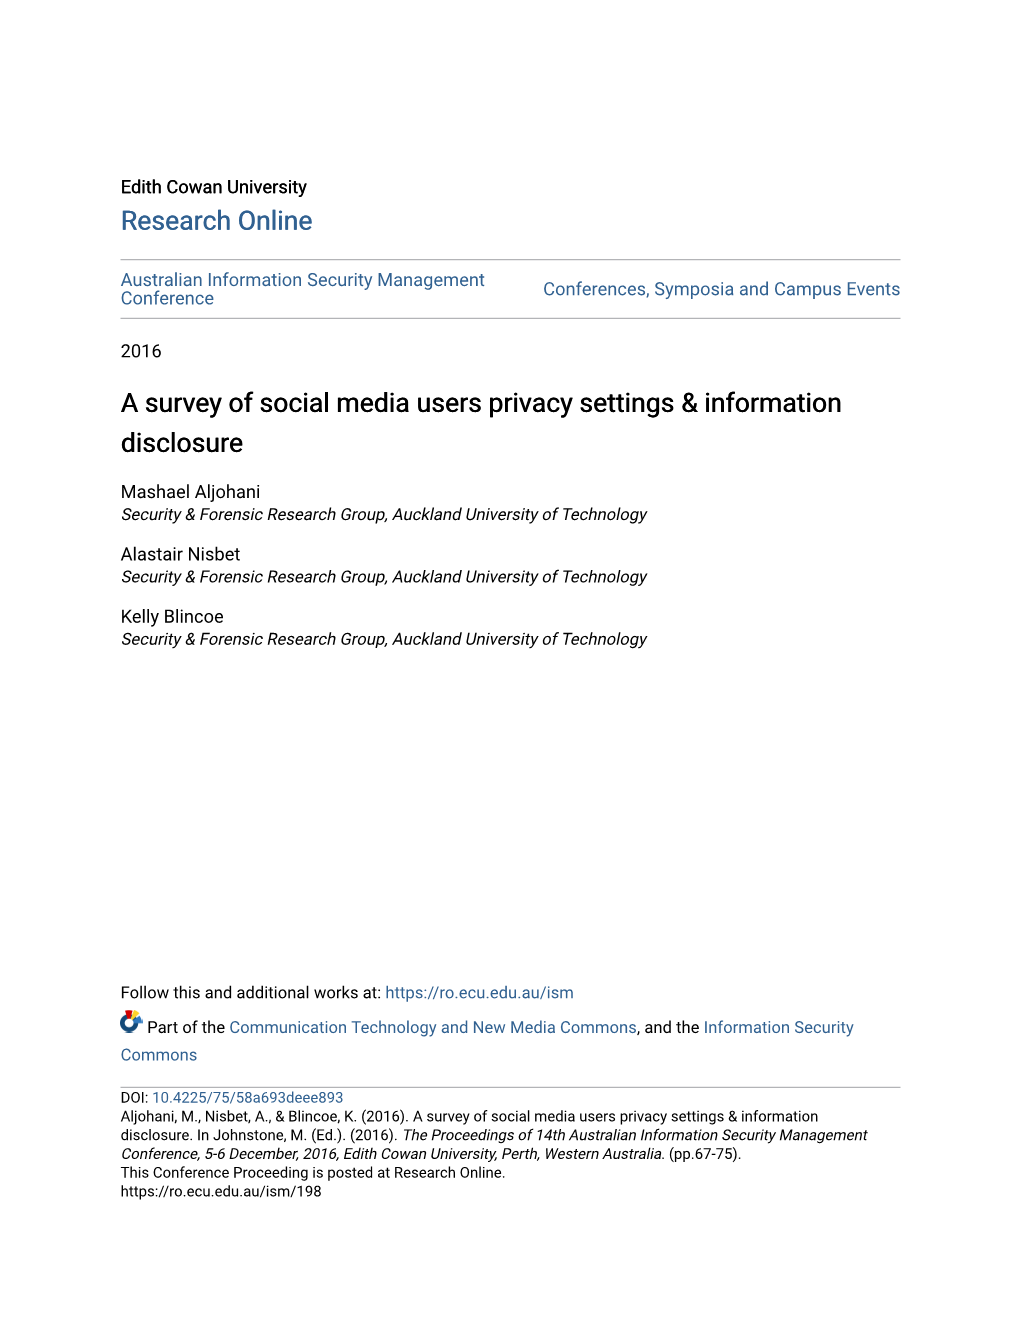 A Survey of Social Media Users Privacy Settings & Information Disclosure